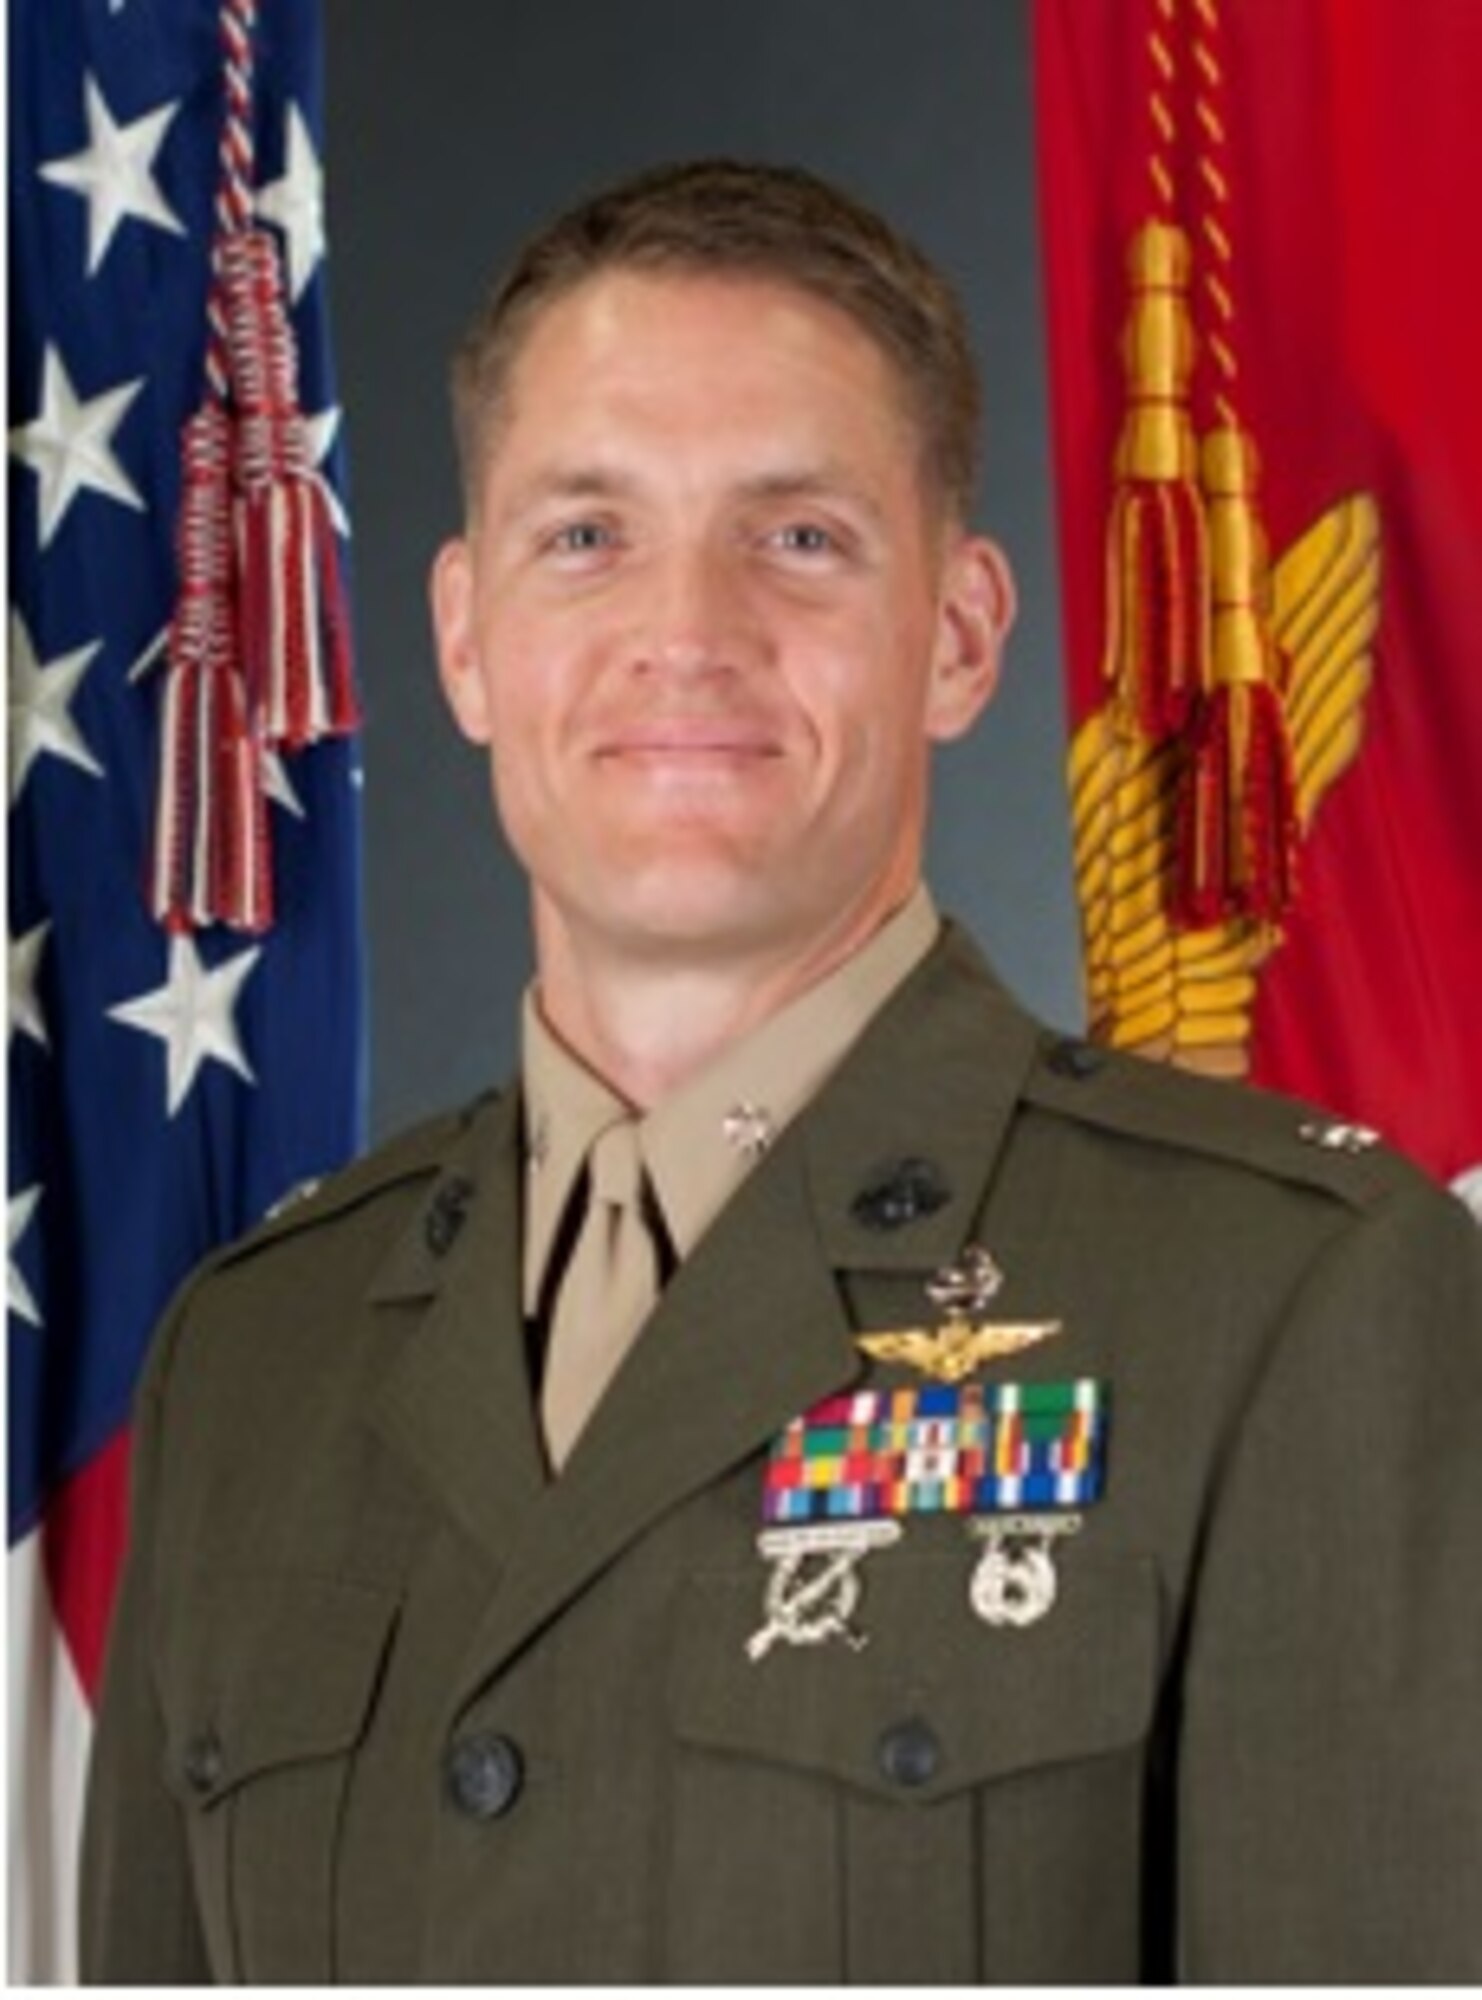 United States Marine Corps Lt. Col. James C. Paxton III earned a master’s degree in aeronautical engineering from the Air Force Institute of Technology’s Graduate School of Engineering and Management in 2014. (U.S. Marines official photo)